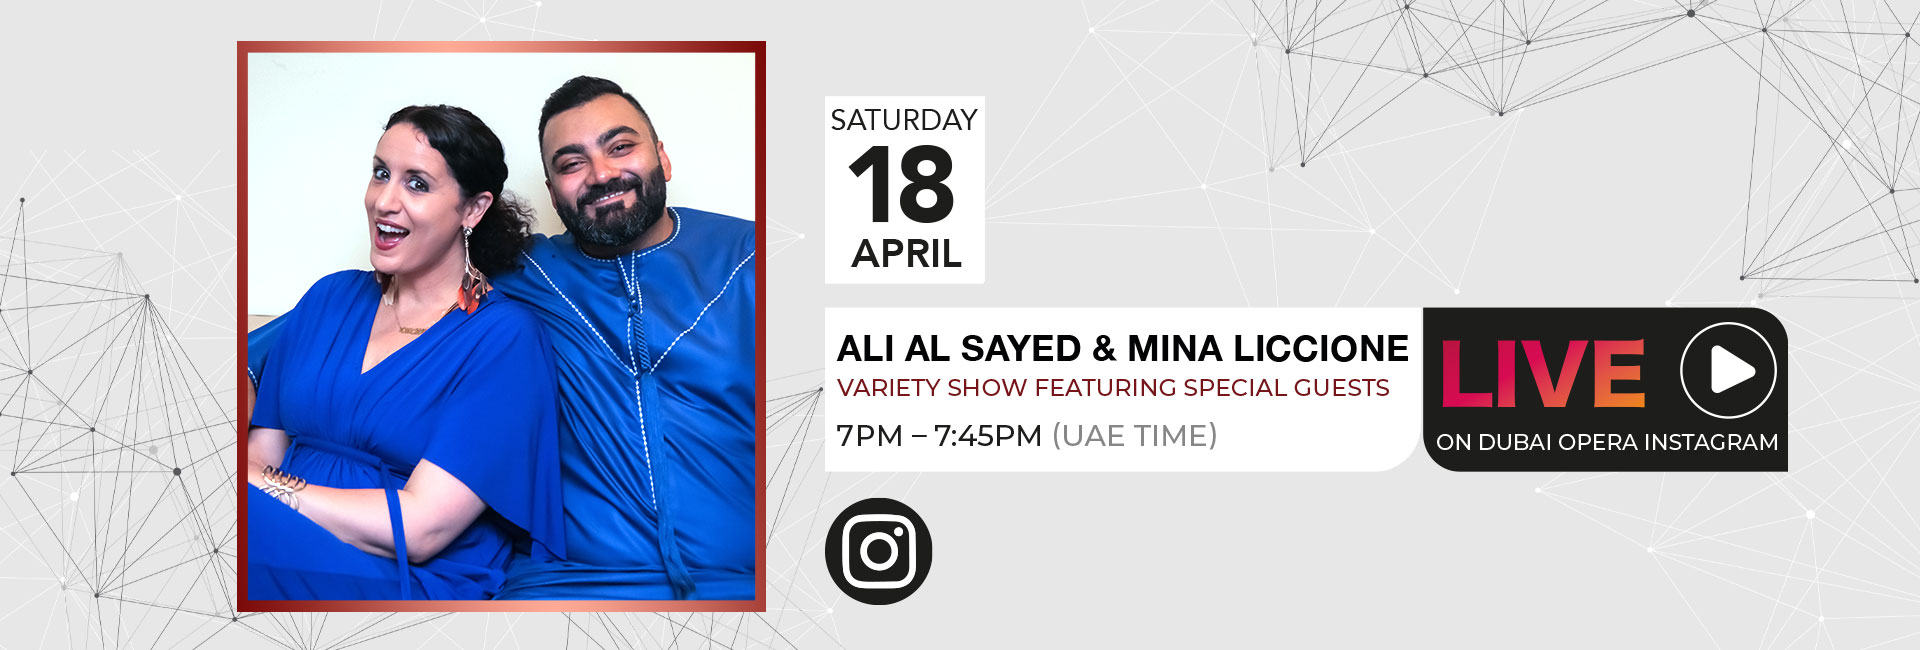 Comedy Variety Show with Ali Al Sayed and Mina Liccione - Coming Soon in UAE